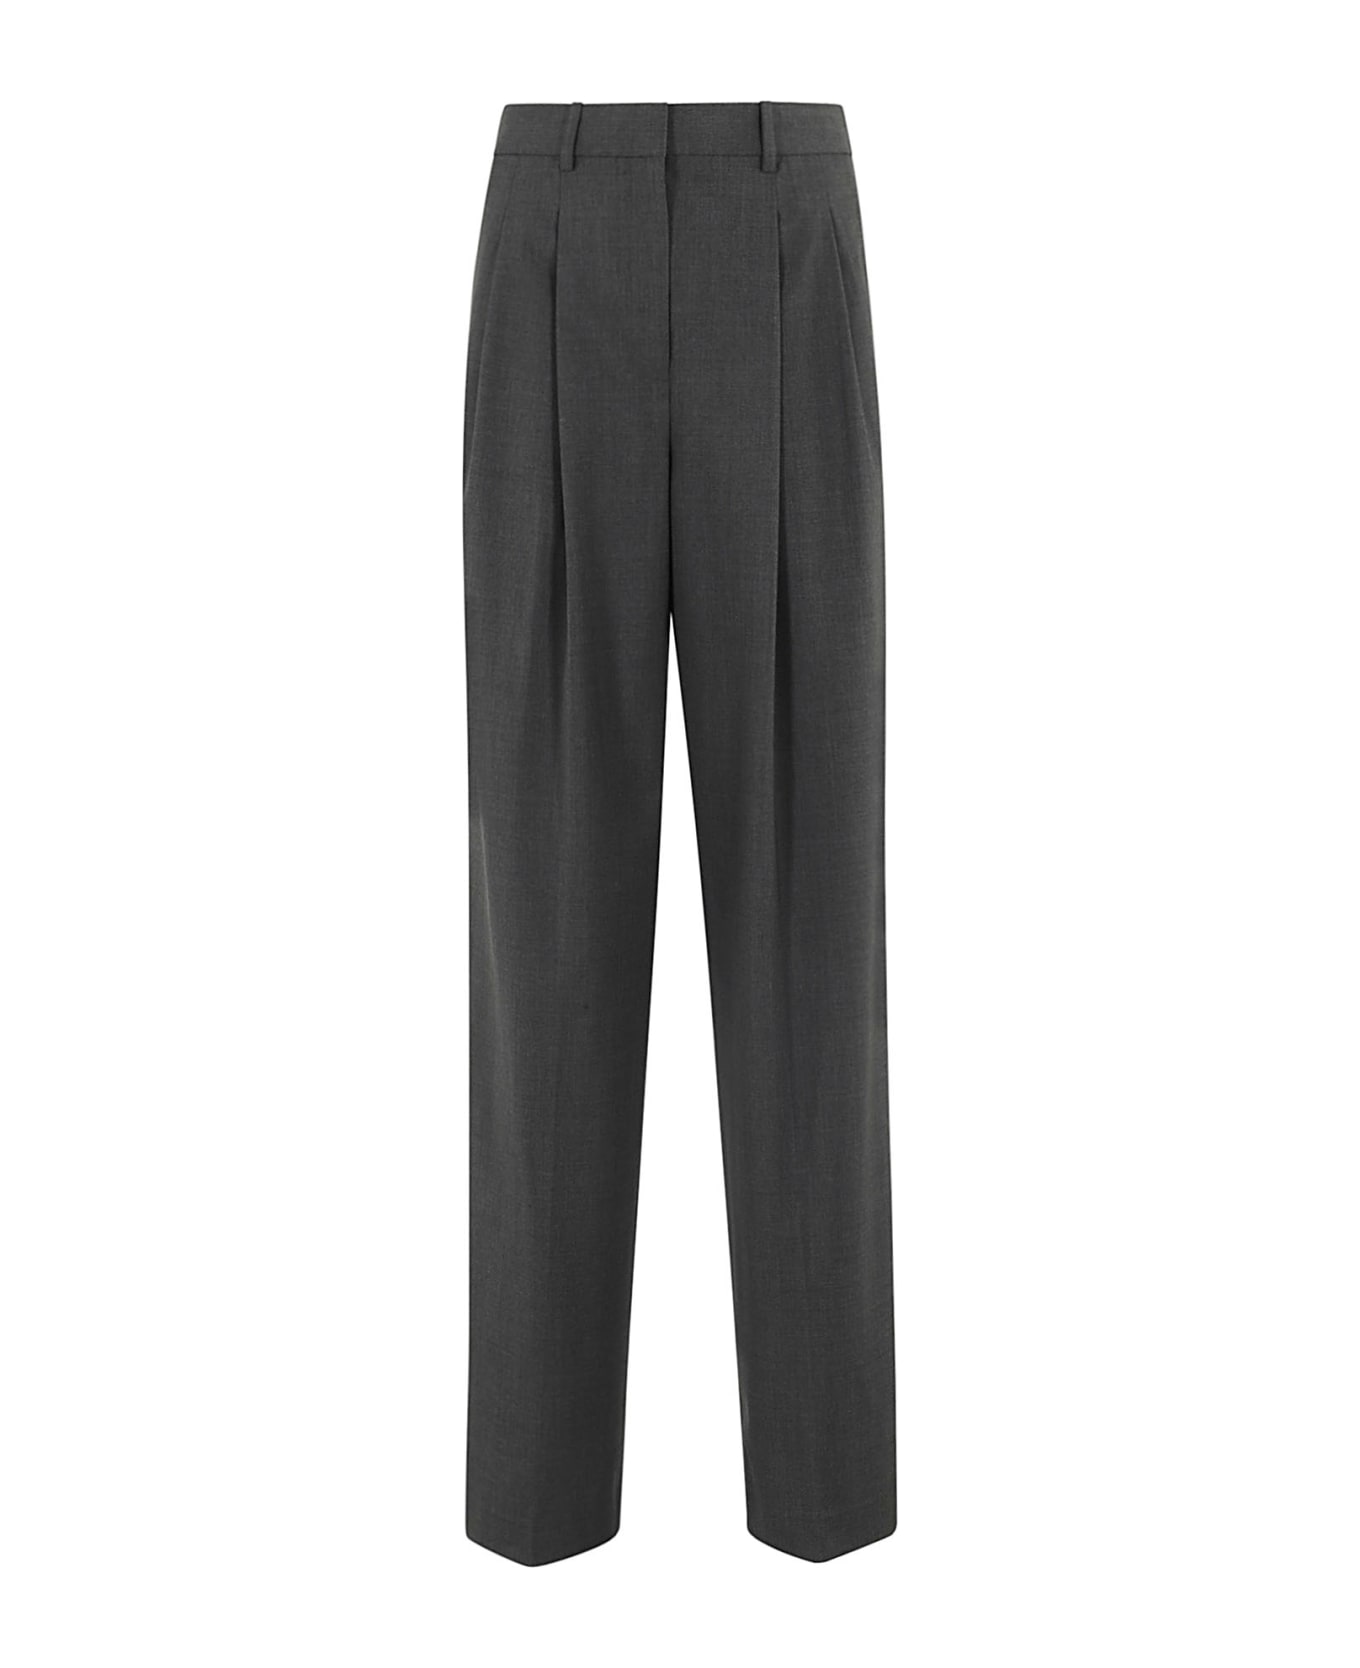 Theory Dbl Pleat - Charcoal Melange